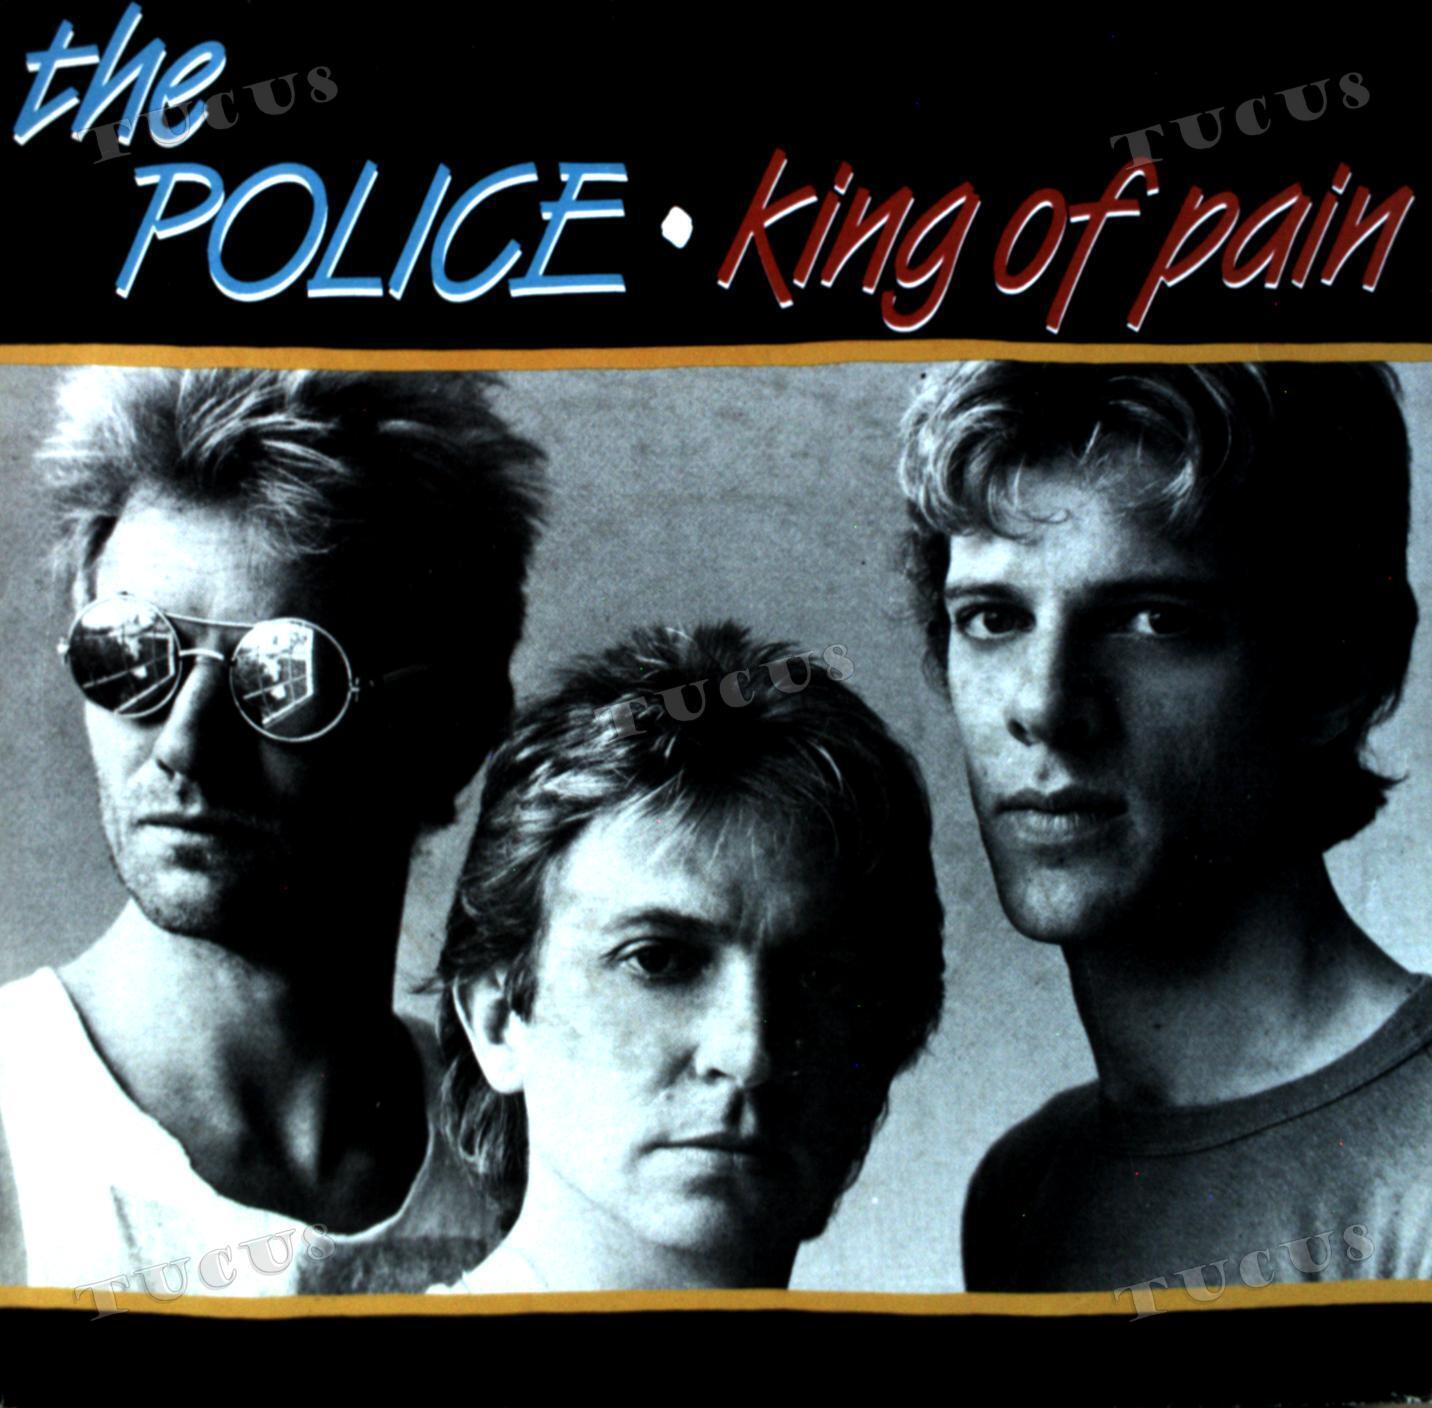 The Police – King Of Pain